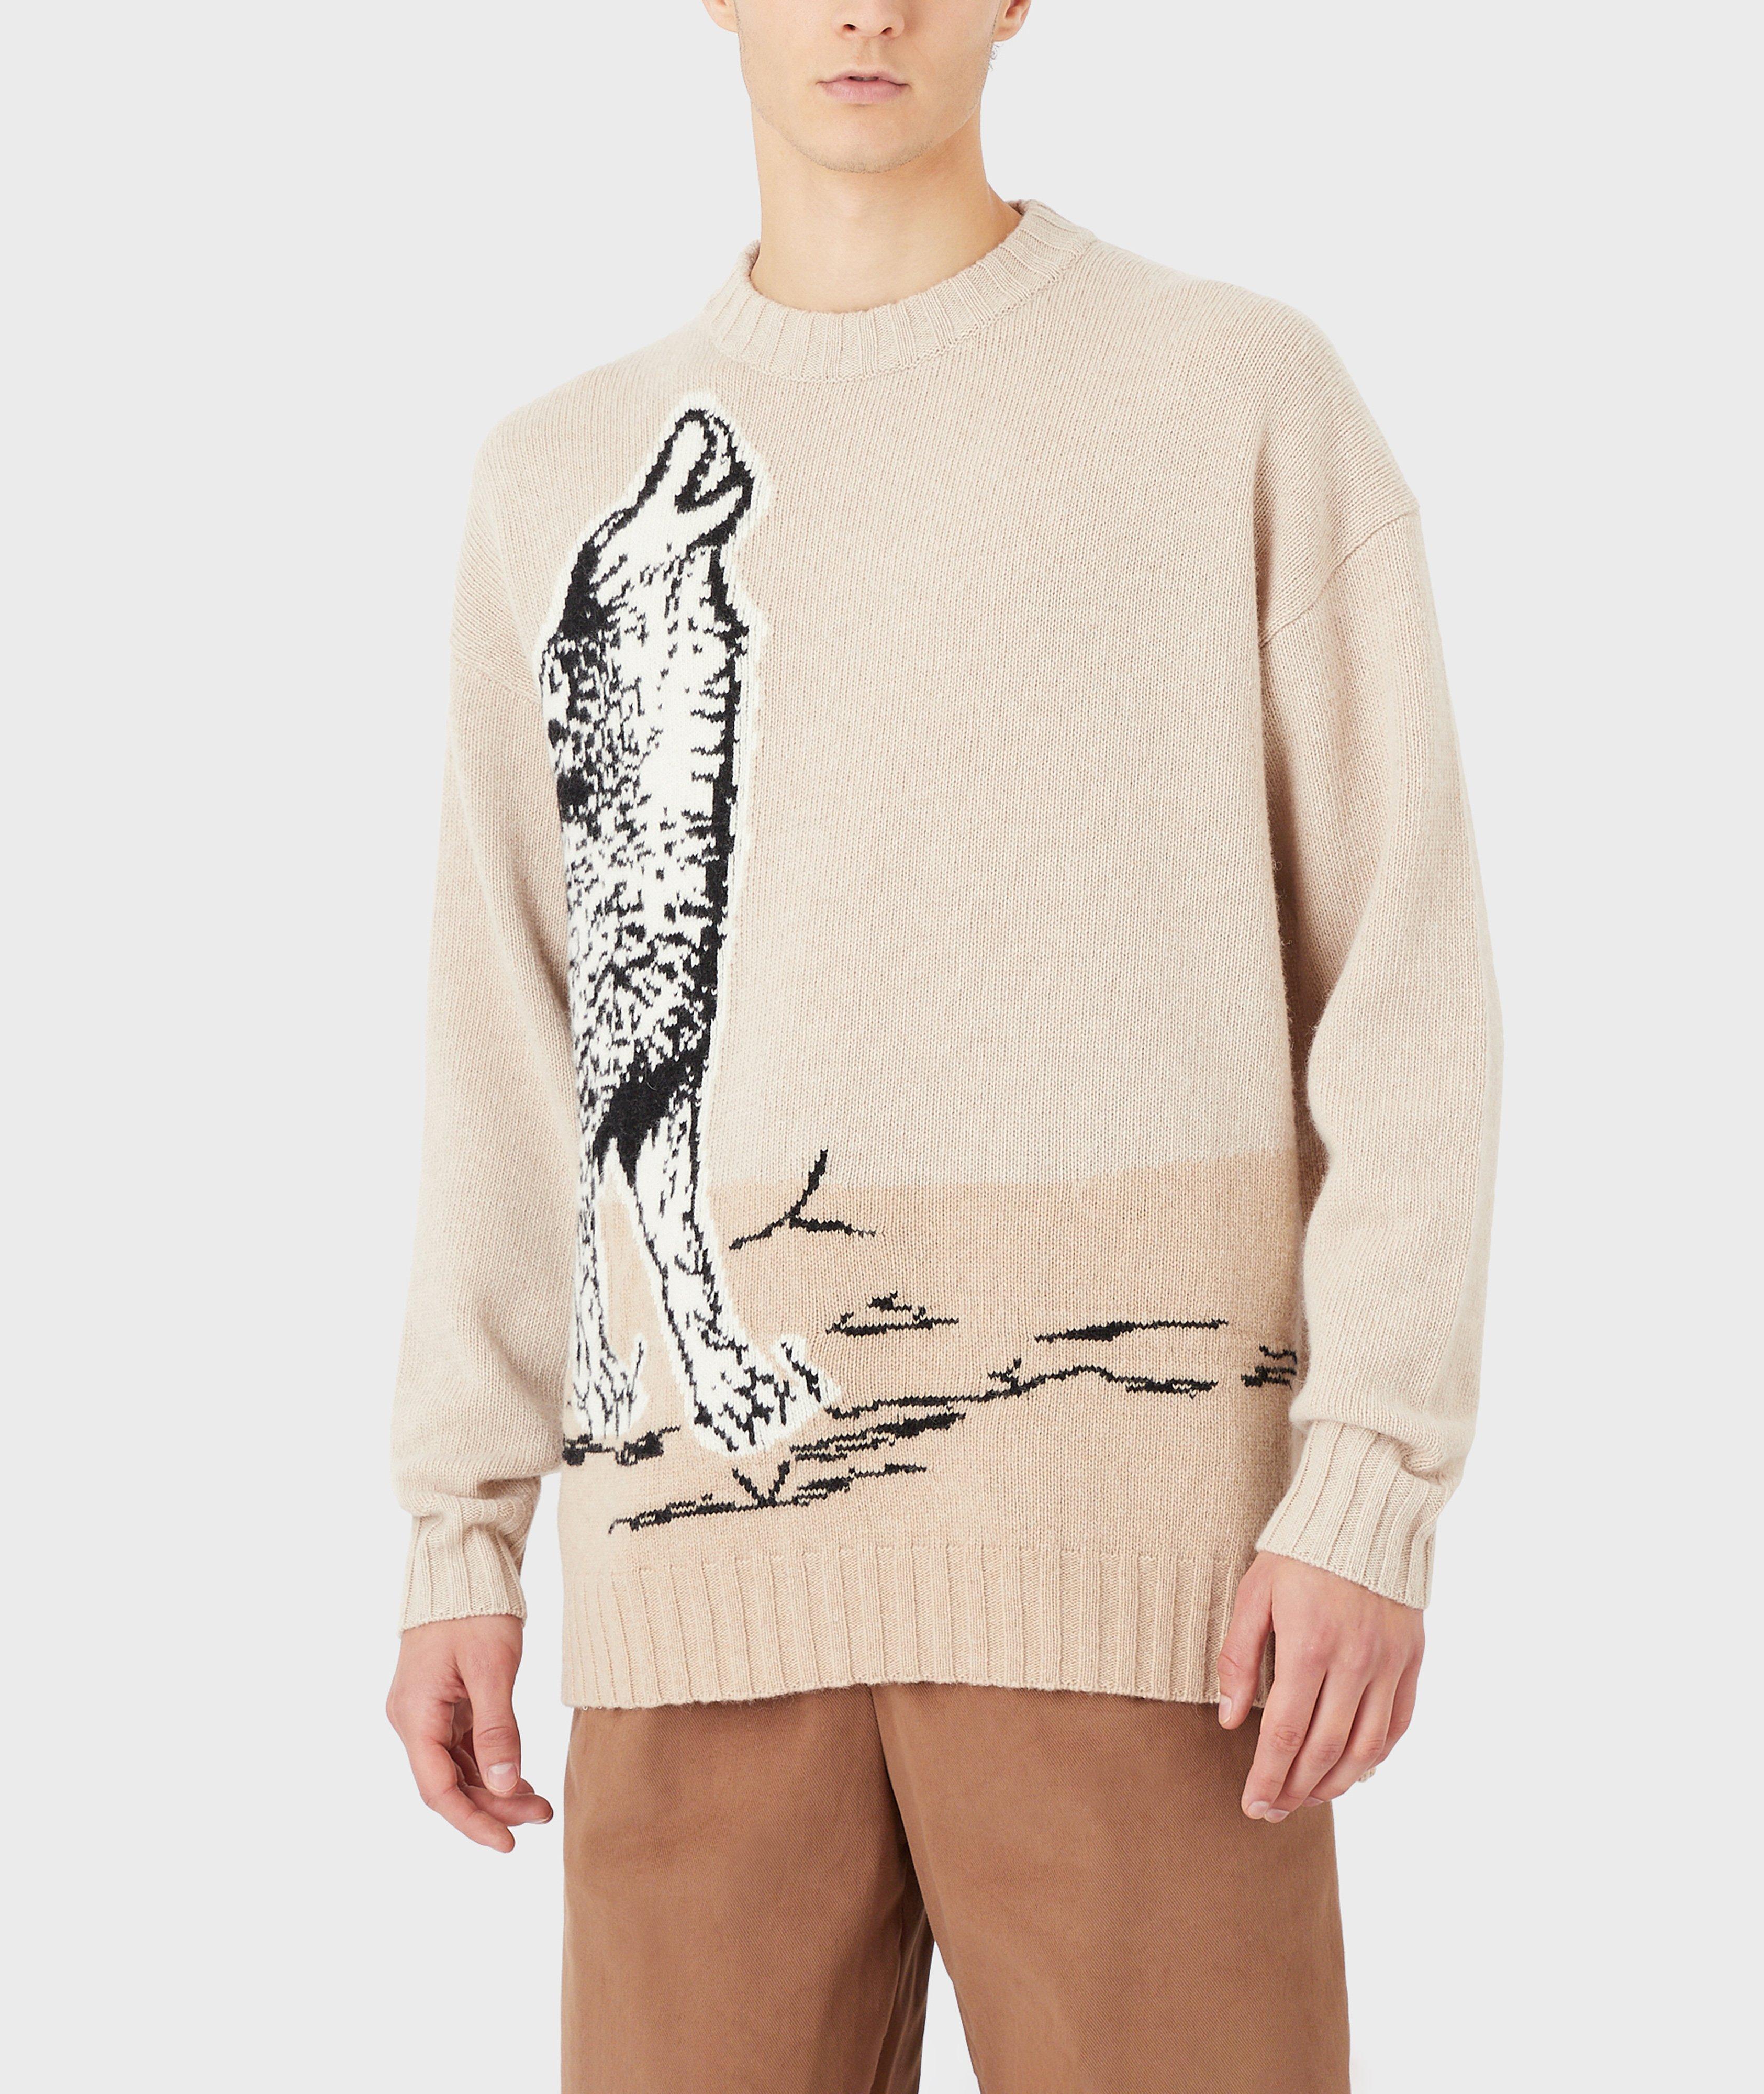 EArctic Sustainable Collection Intarsia Animal Sweater image 1